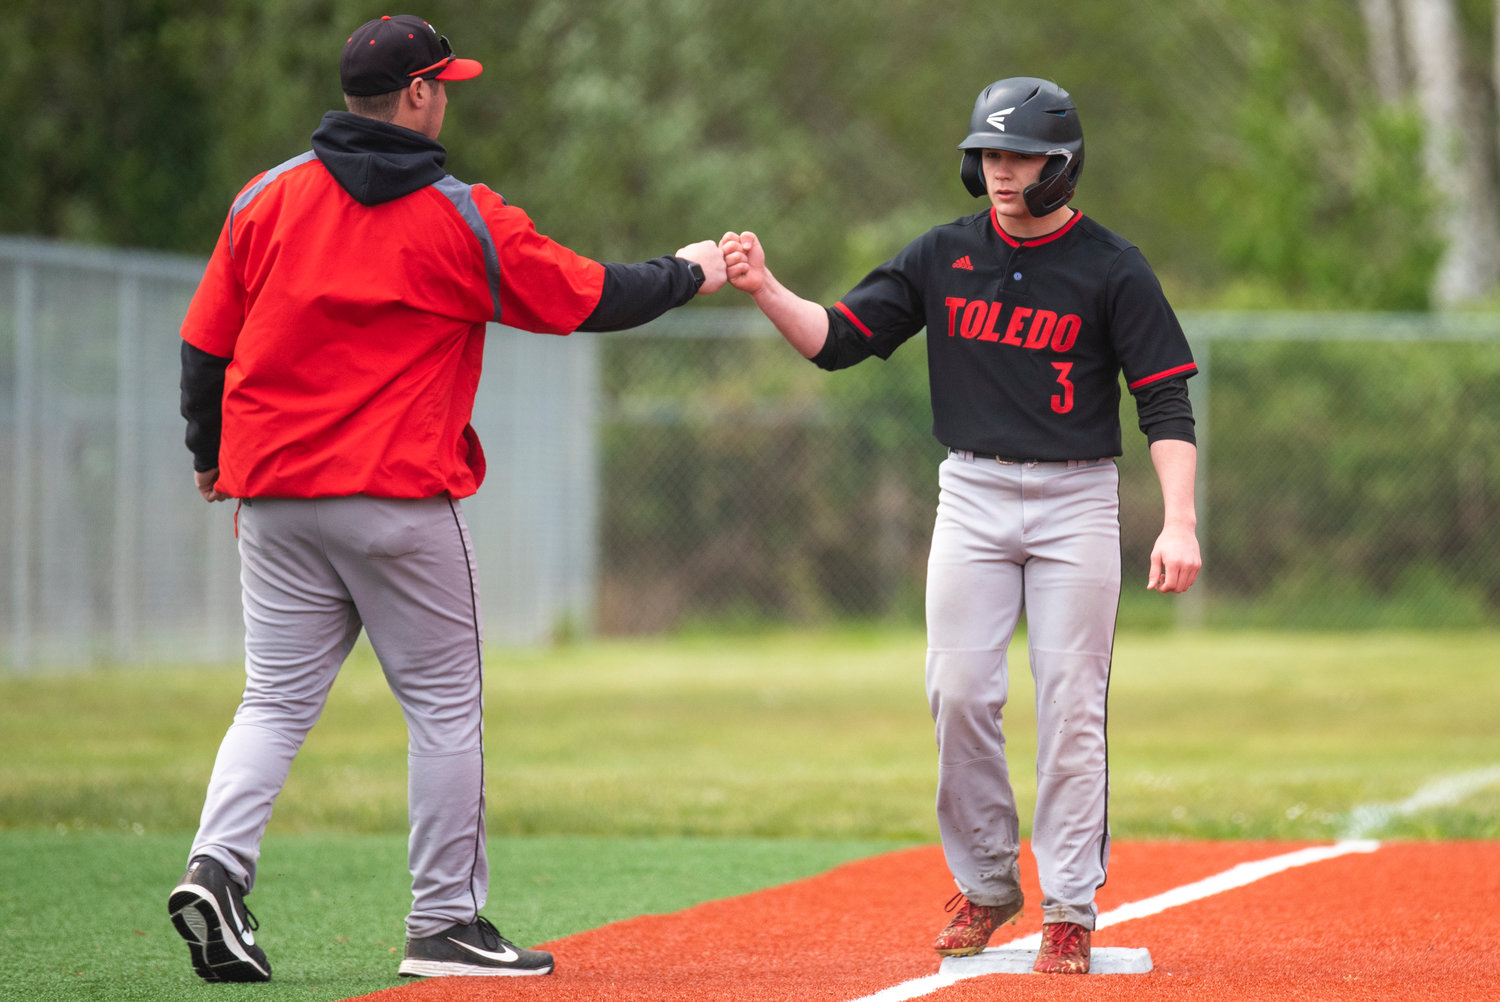 Toledo coach Mack Gaul, left, fist-bumps Toledo's Justin Filla on third base during a district-playoff win over Ilwaco on May 7.